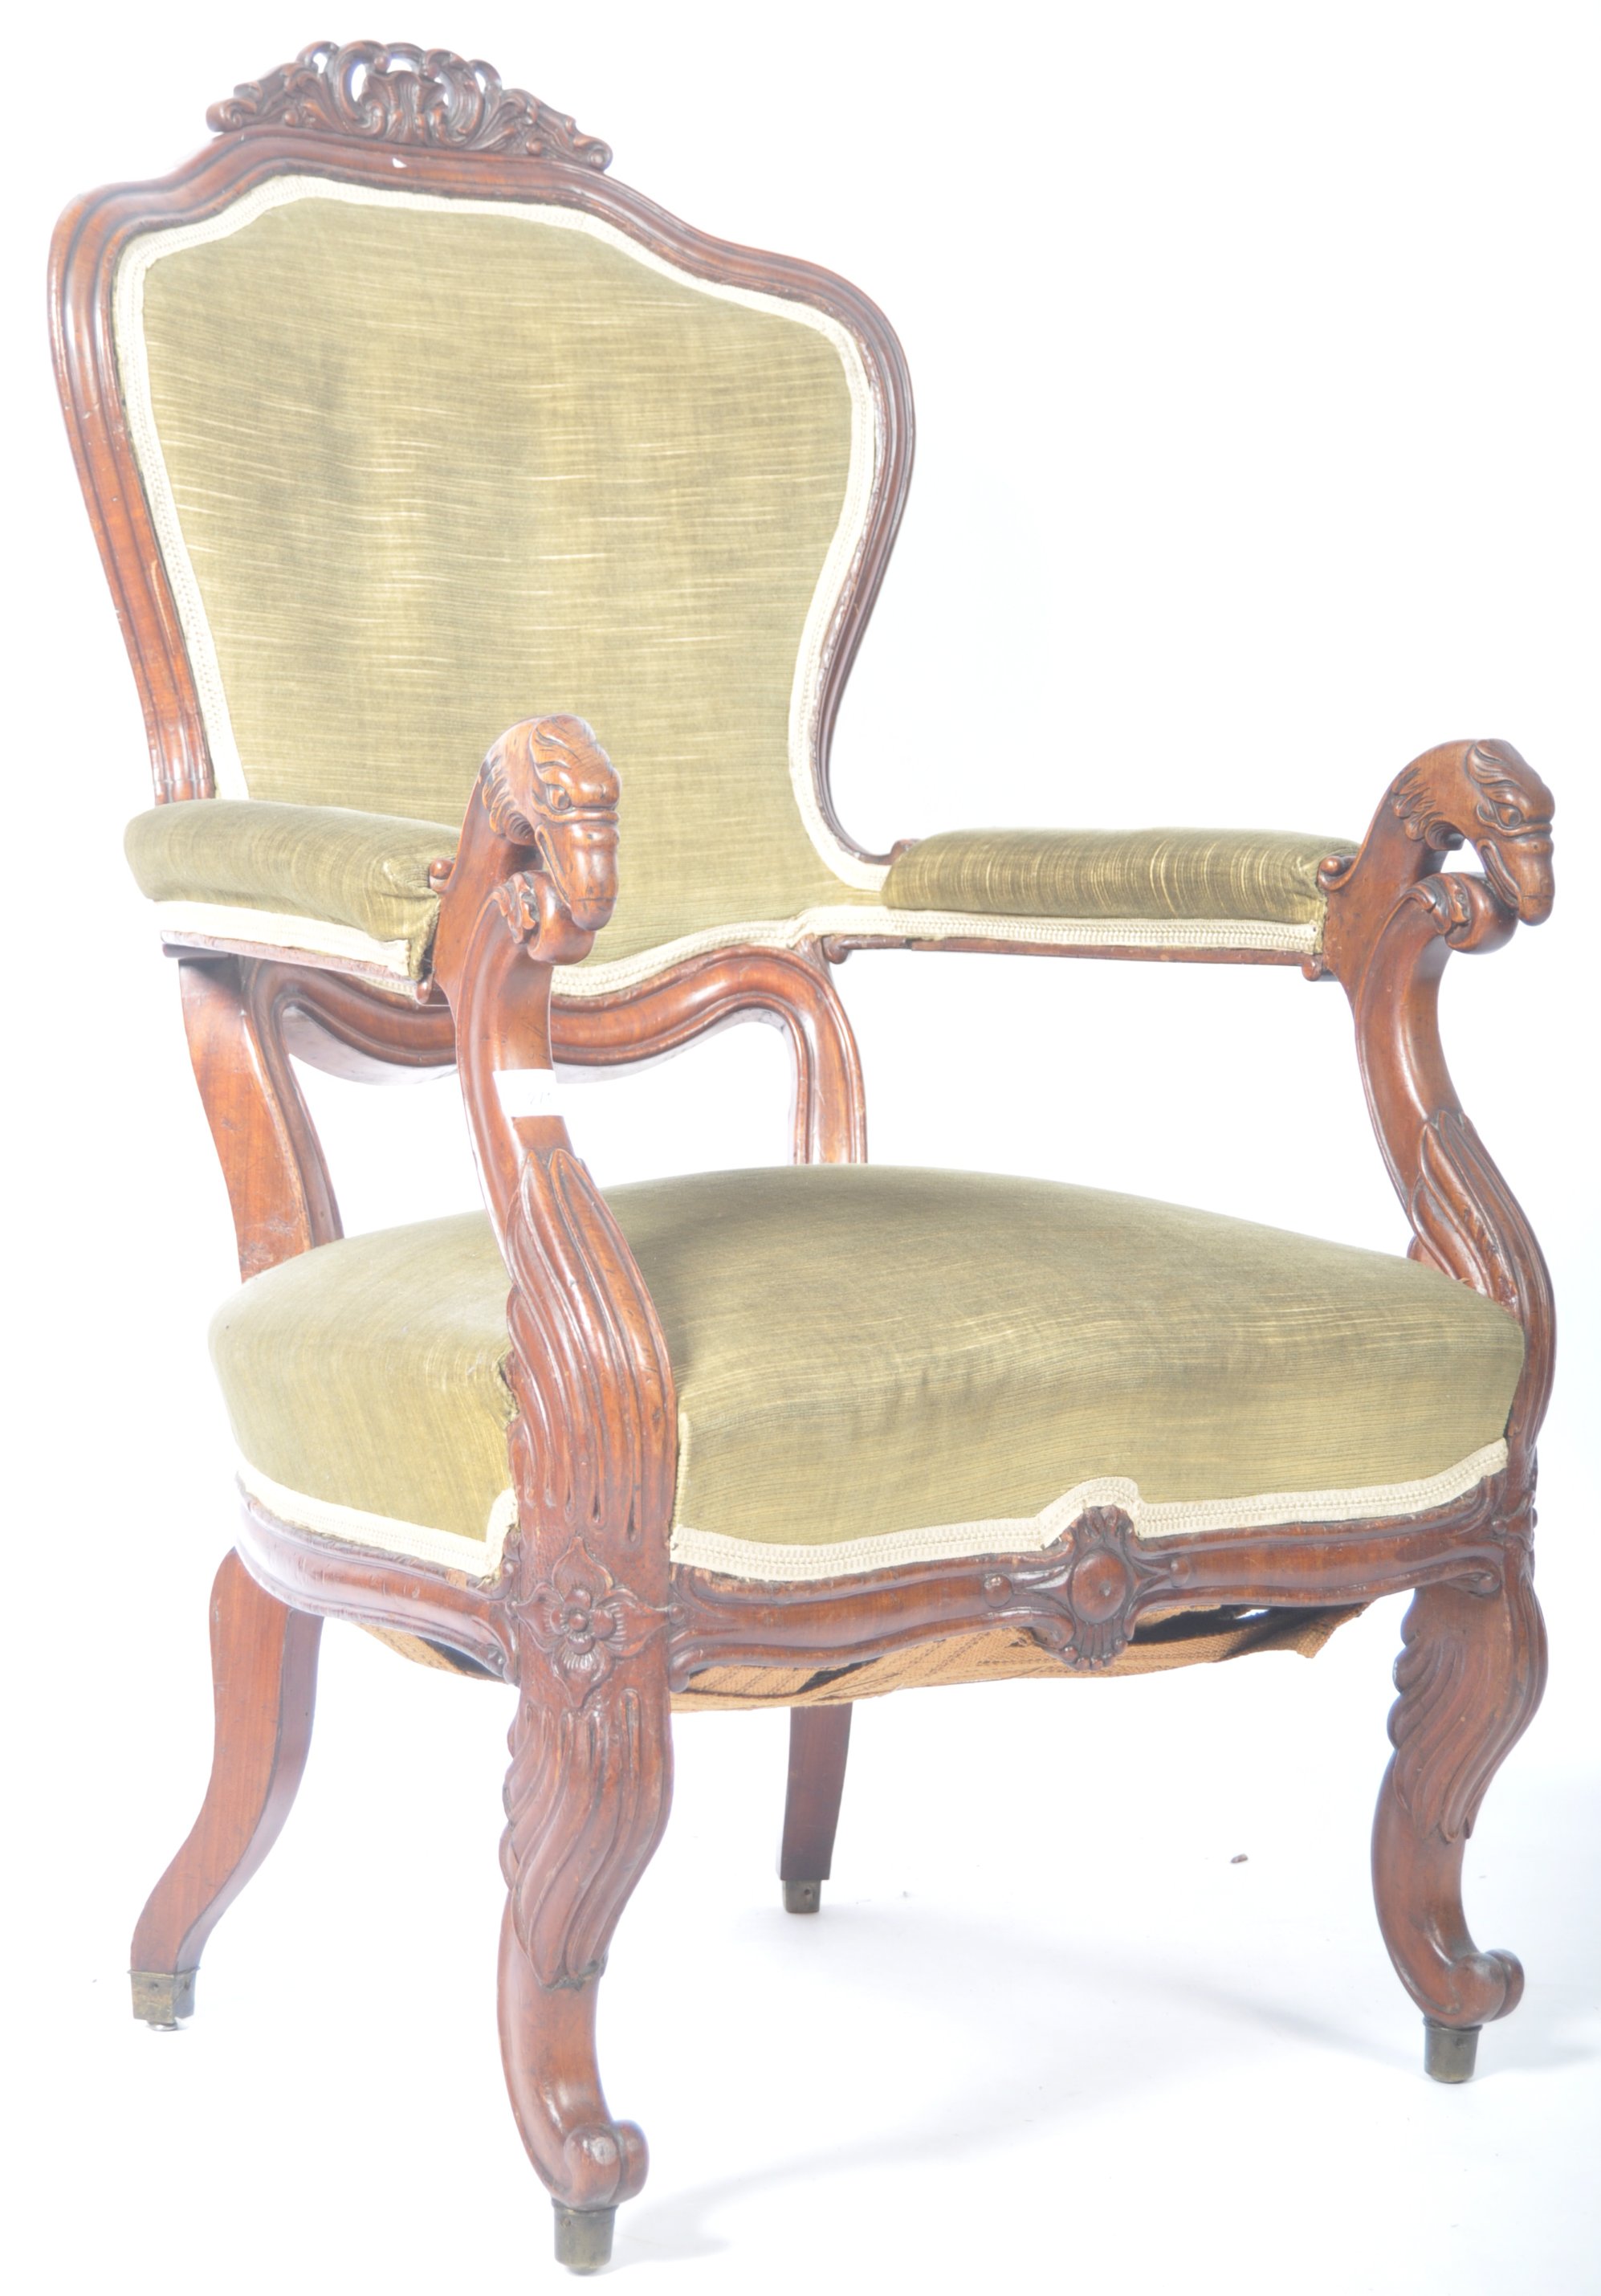 19TH CENTURY WALNUT ANTIQUE ARM CHAIR WITH ANIMAL HEAD ARMRESTS